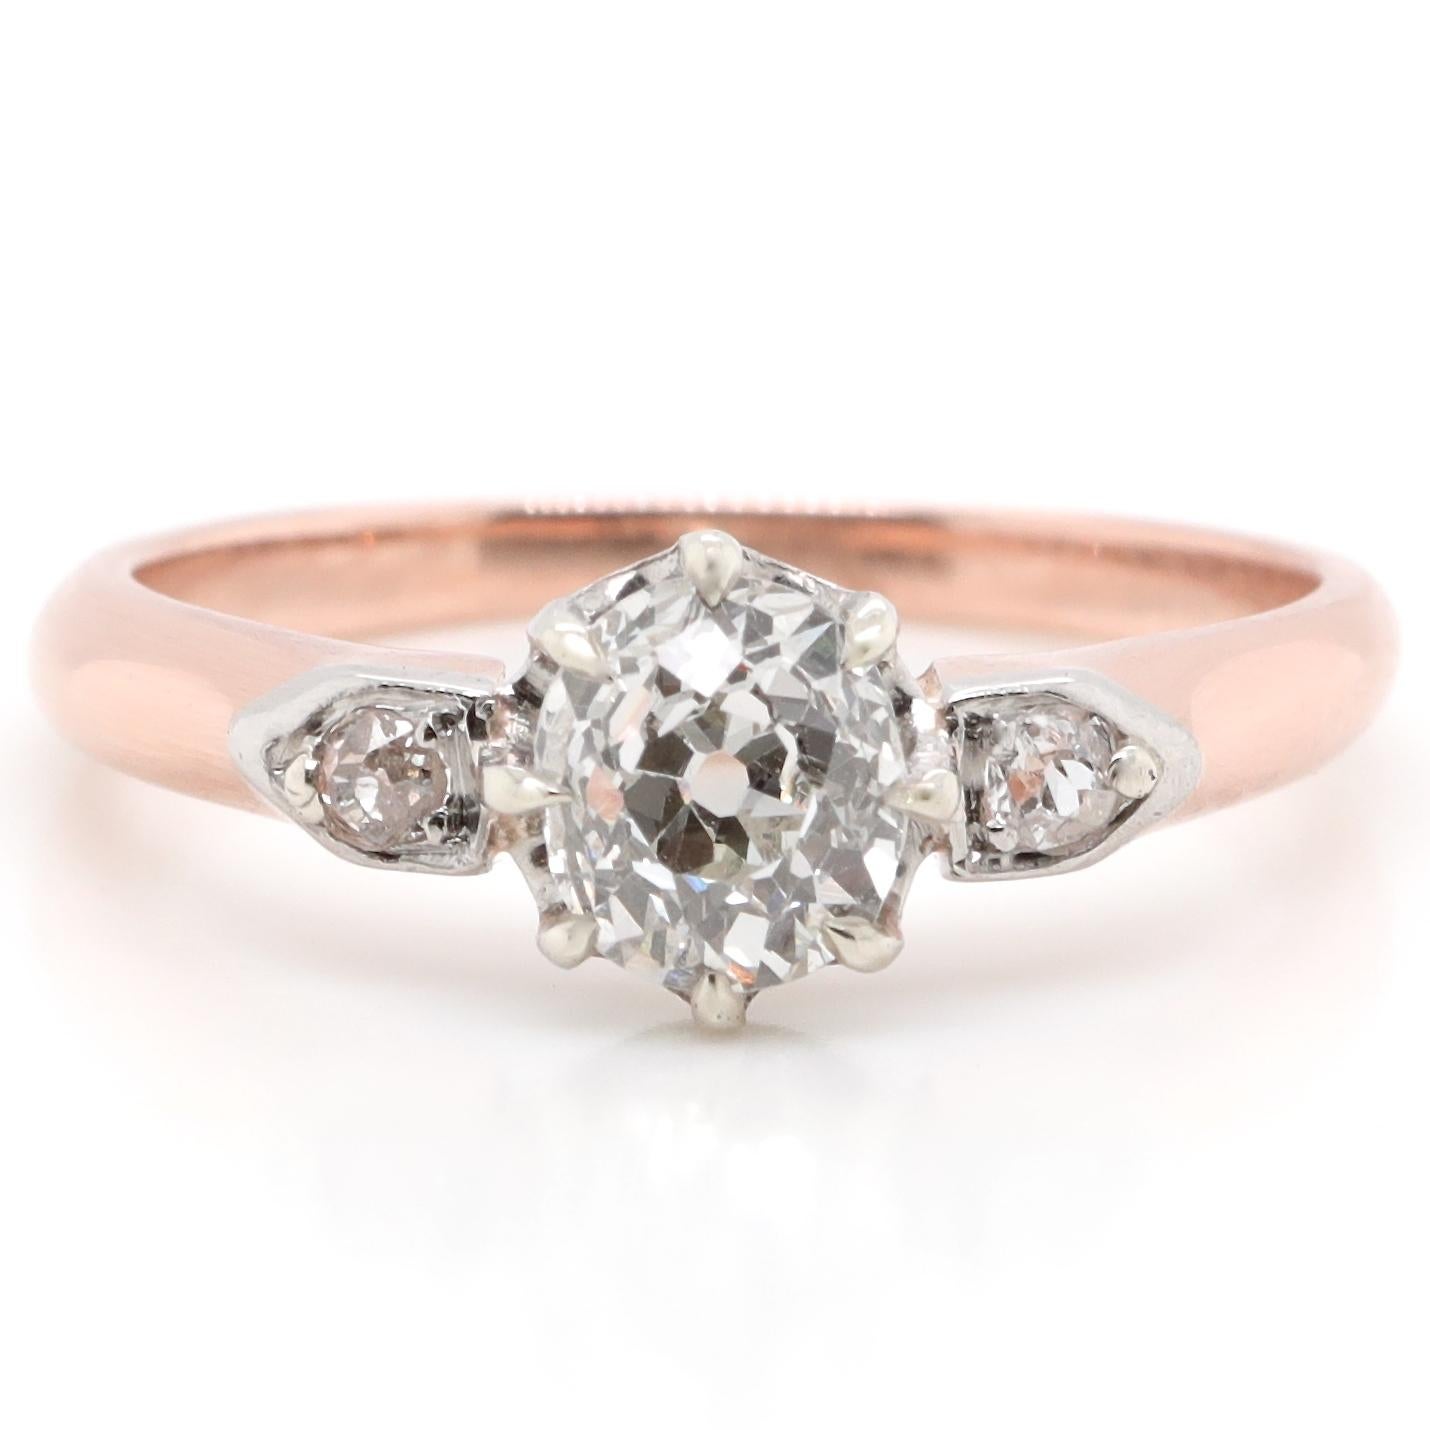 Many people consider rose gold rings a modern trend. However, they've been around for centuries. And this beauty is a gorgeous example of an Edwardian Diamond Rose Gold Engagement Ring. This ring was made for a delicate and gentle lady. The smooth